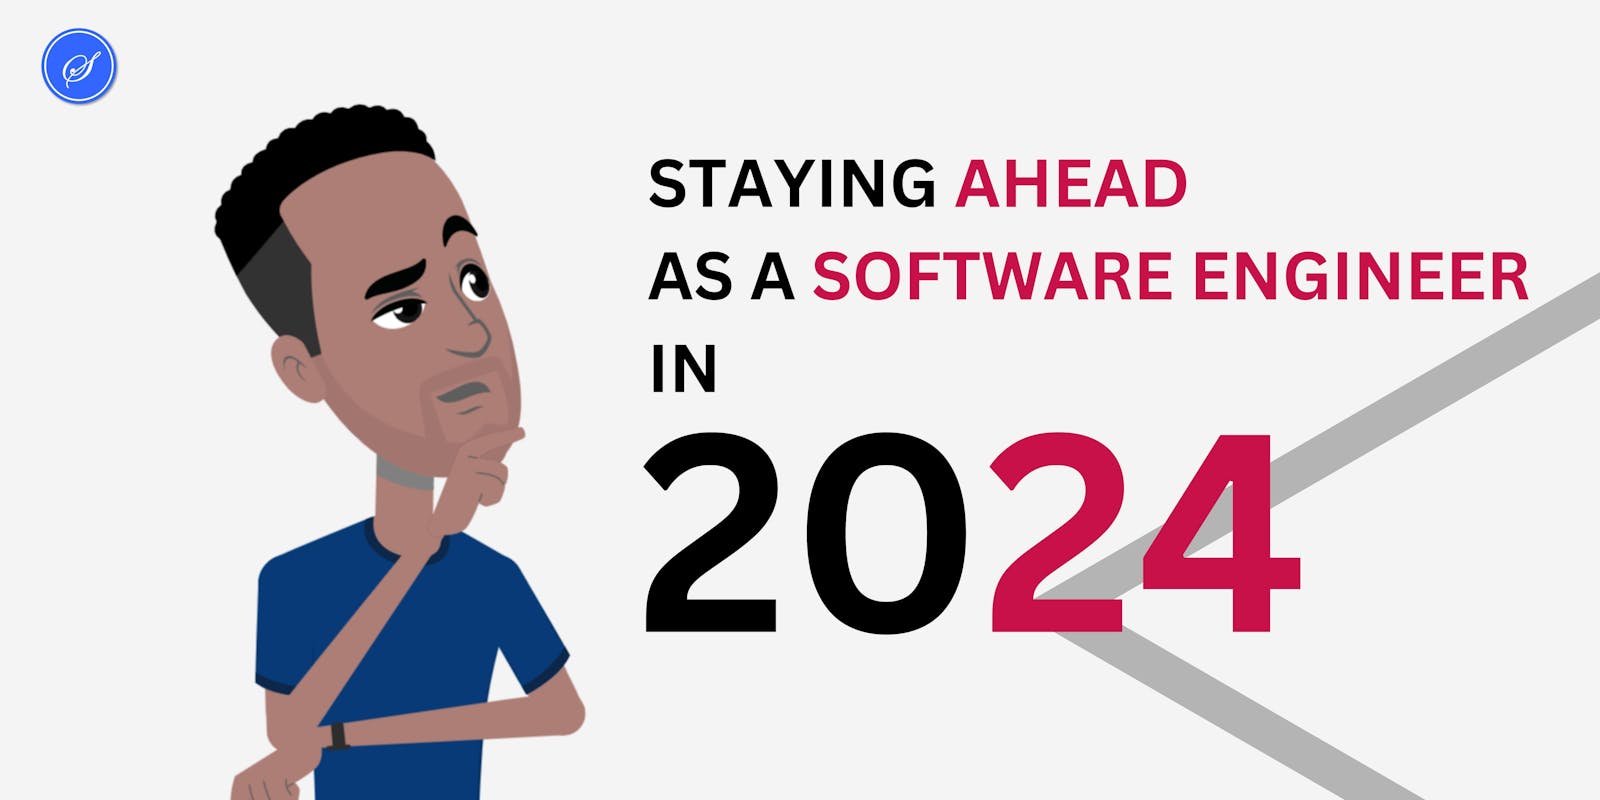 Staying Ahead as a Software Engineer in 2024